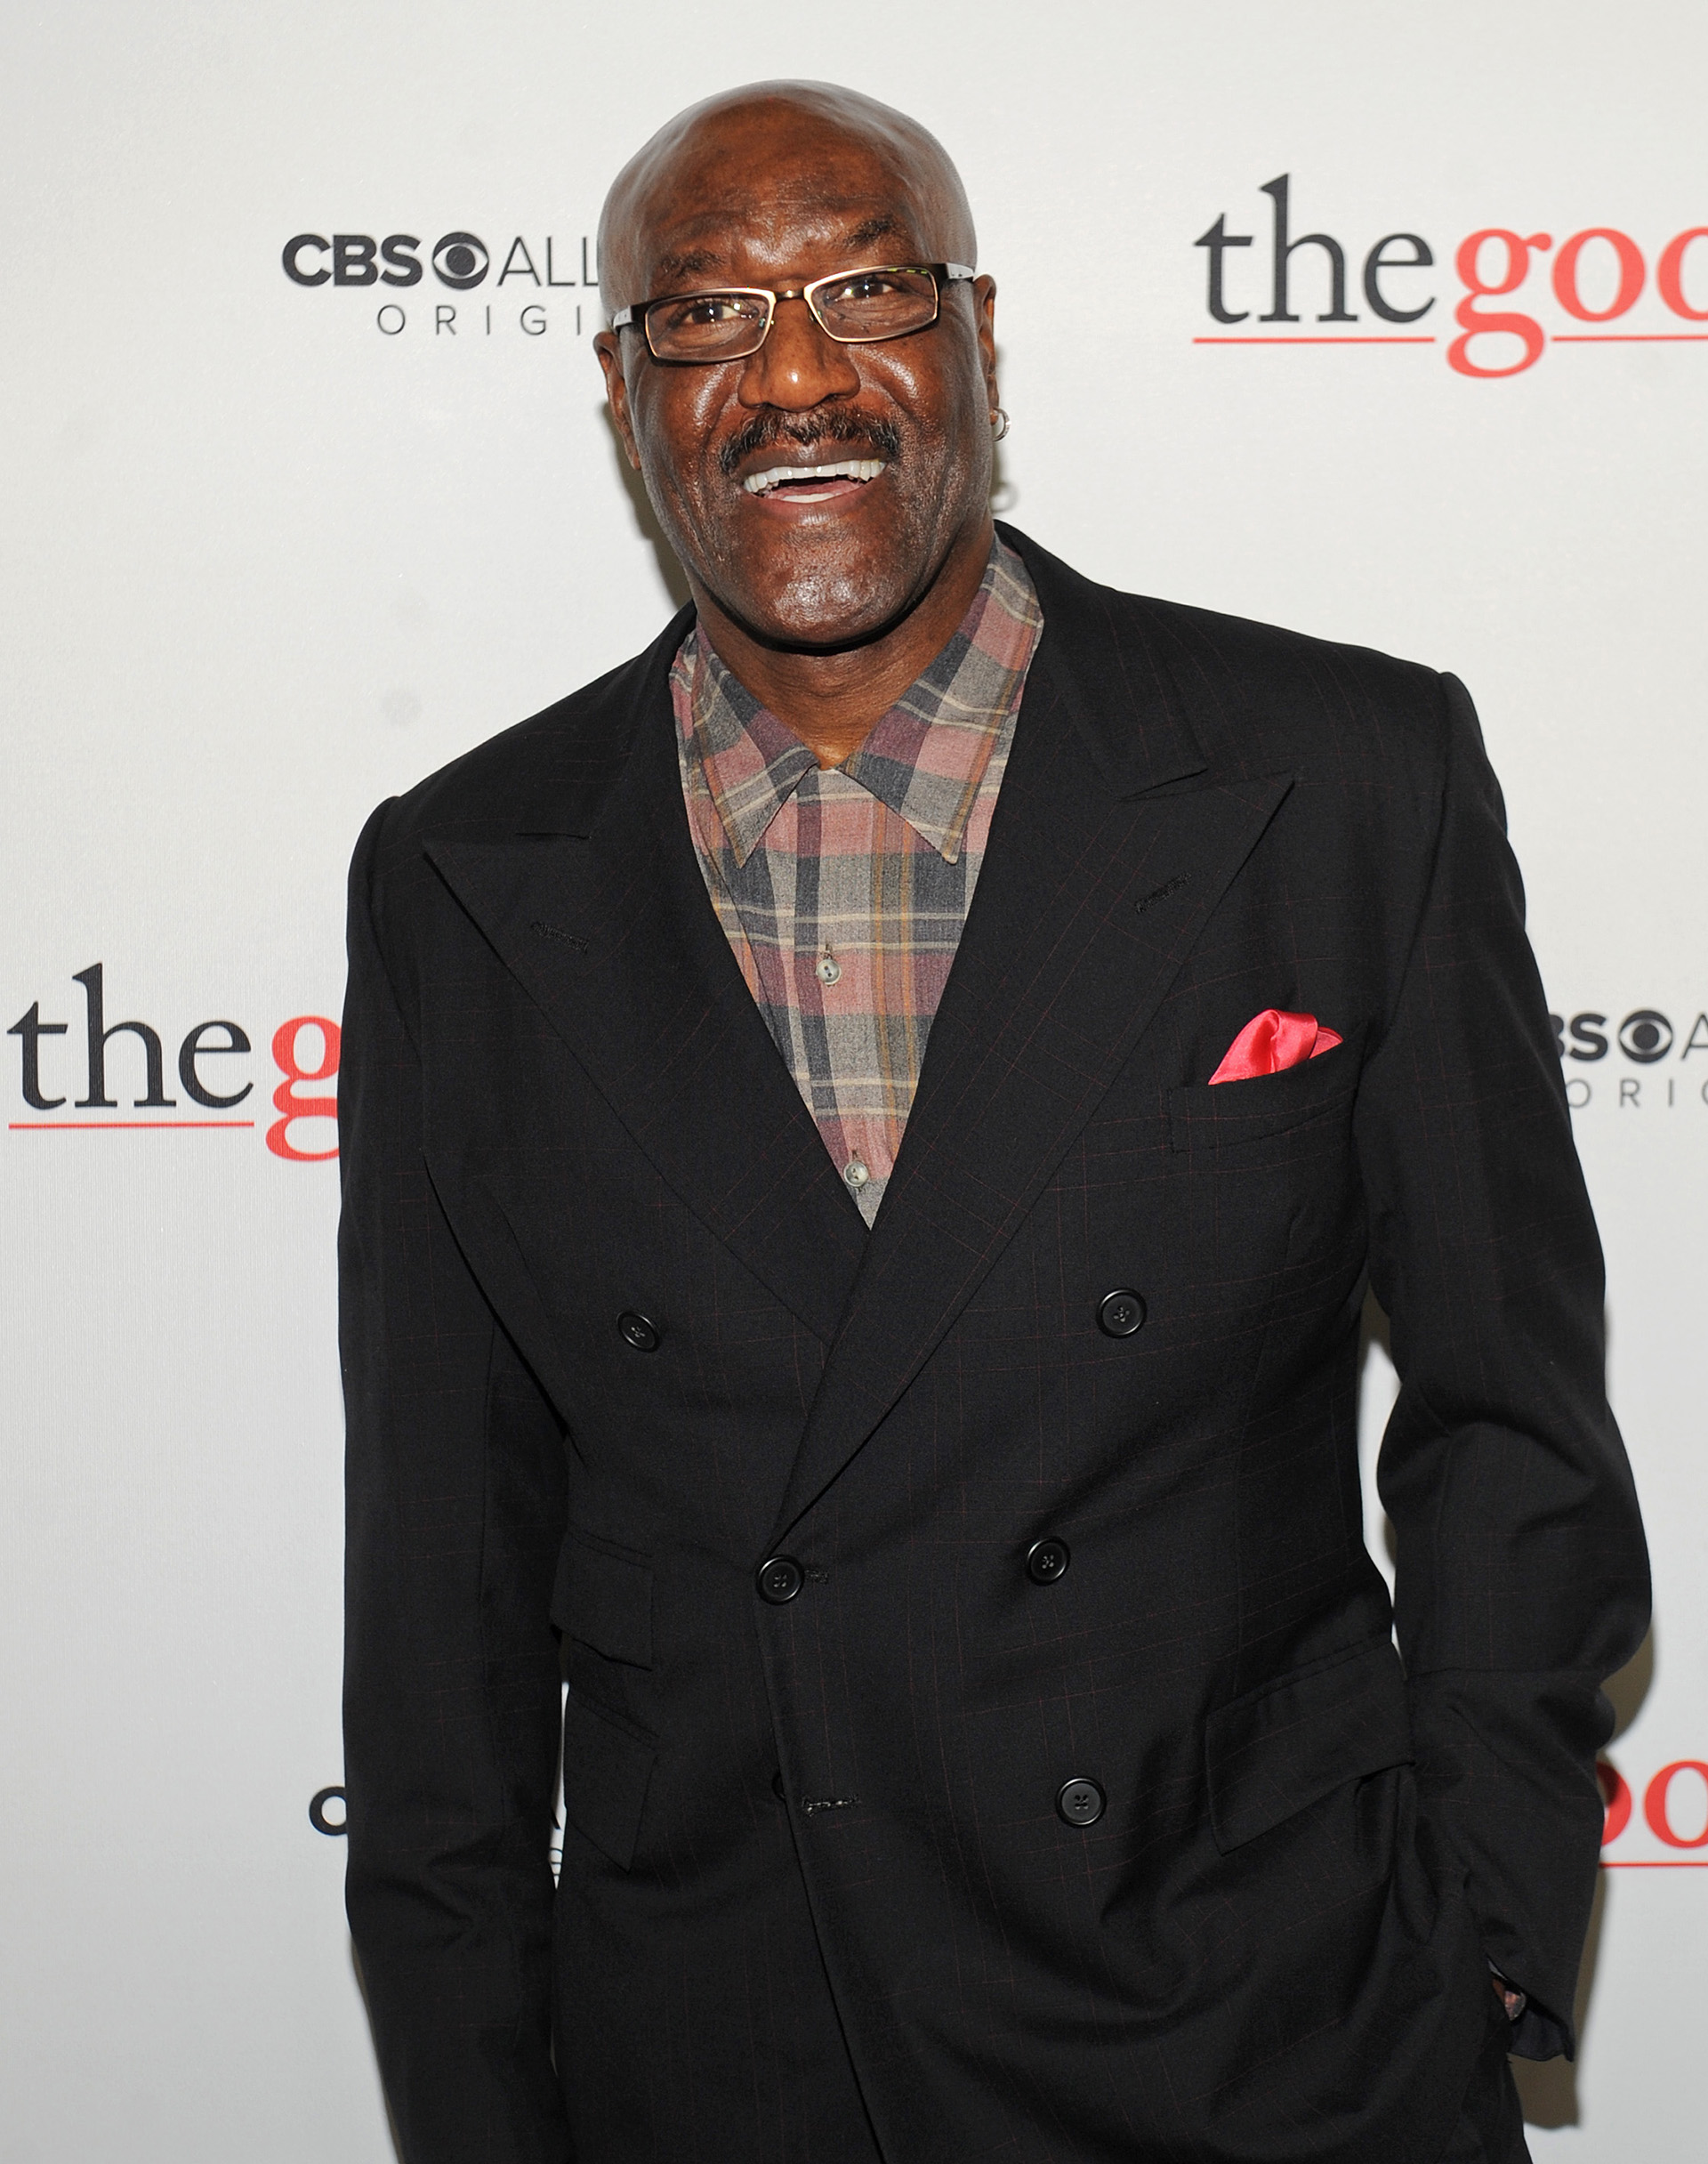 The always-dapper Delroy Lindo matched his pocket square with the red carpet!